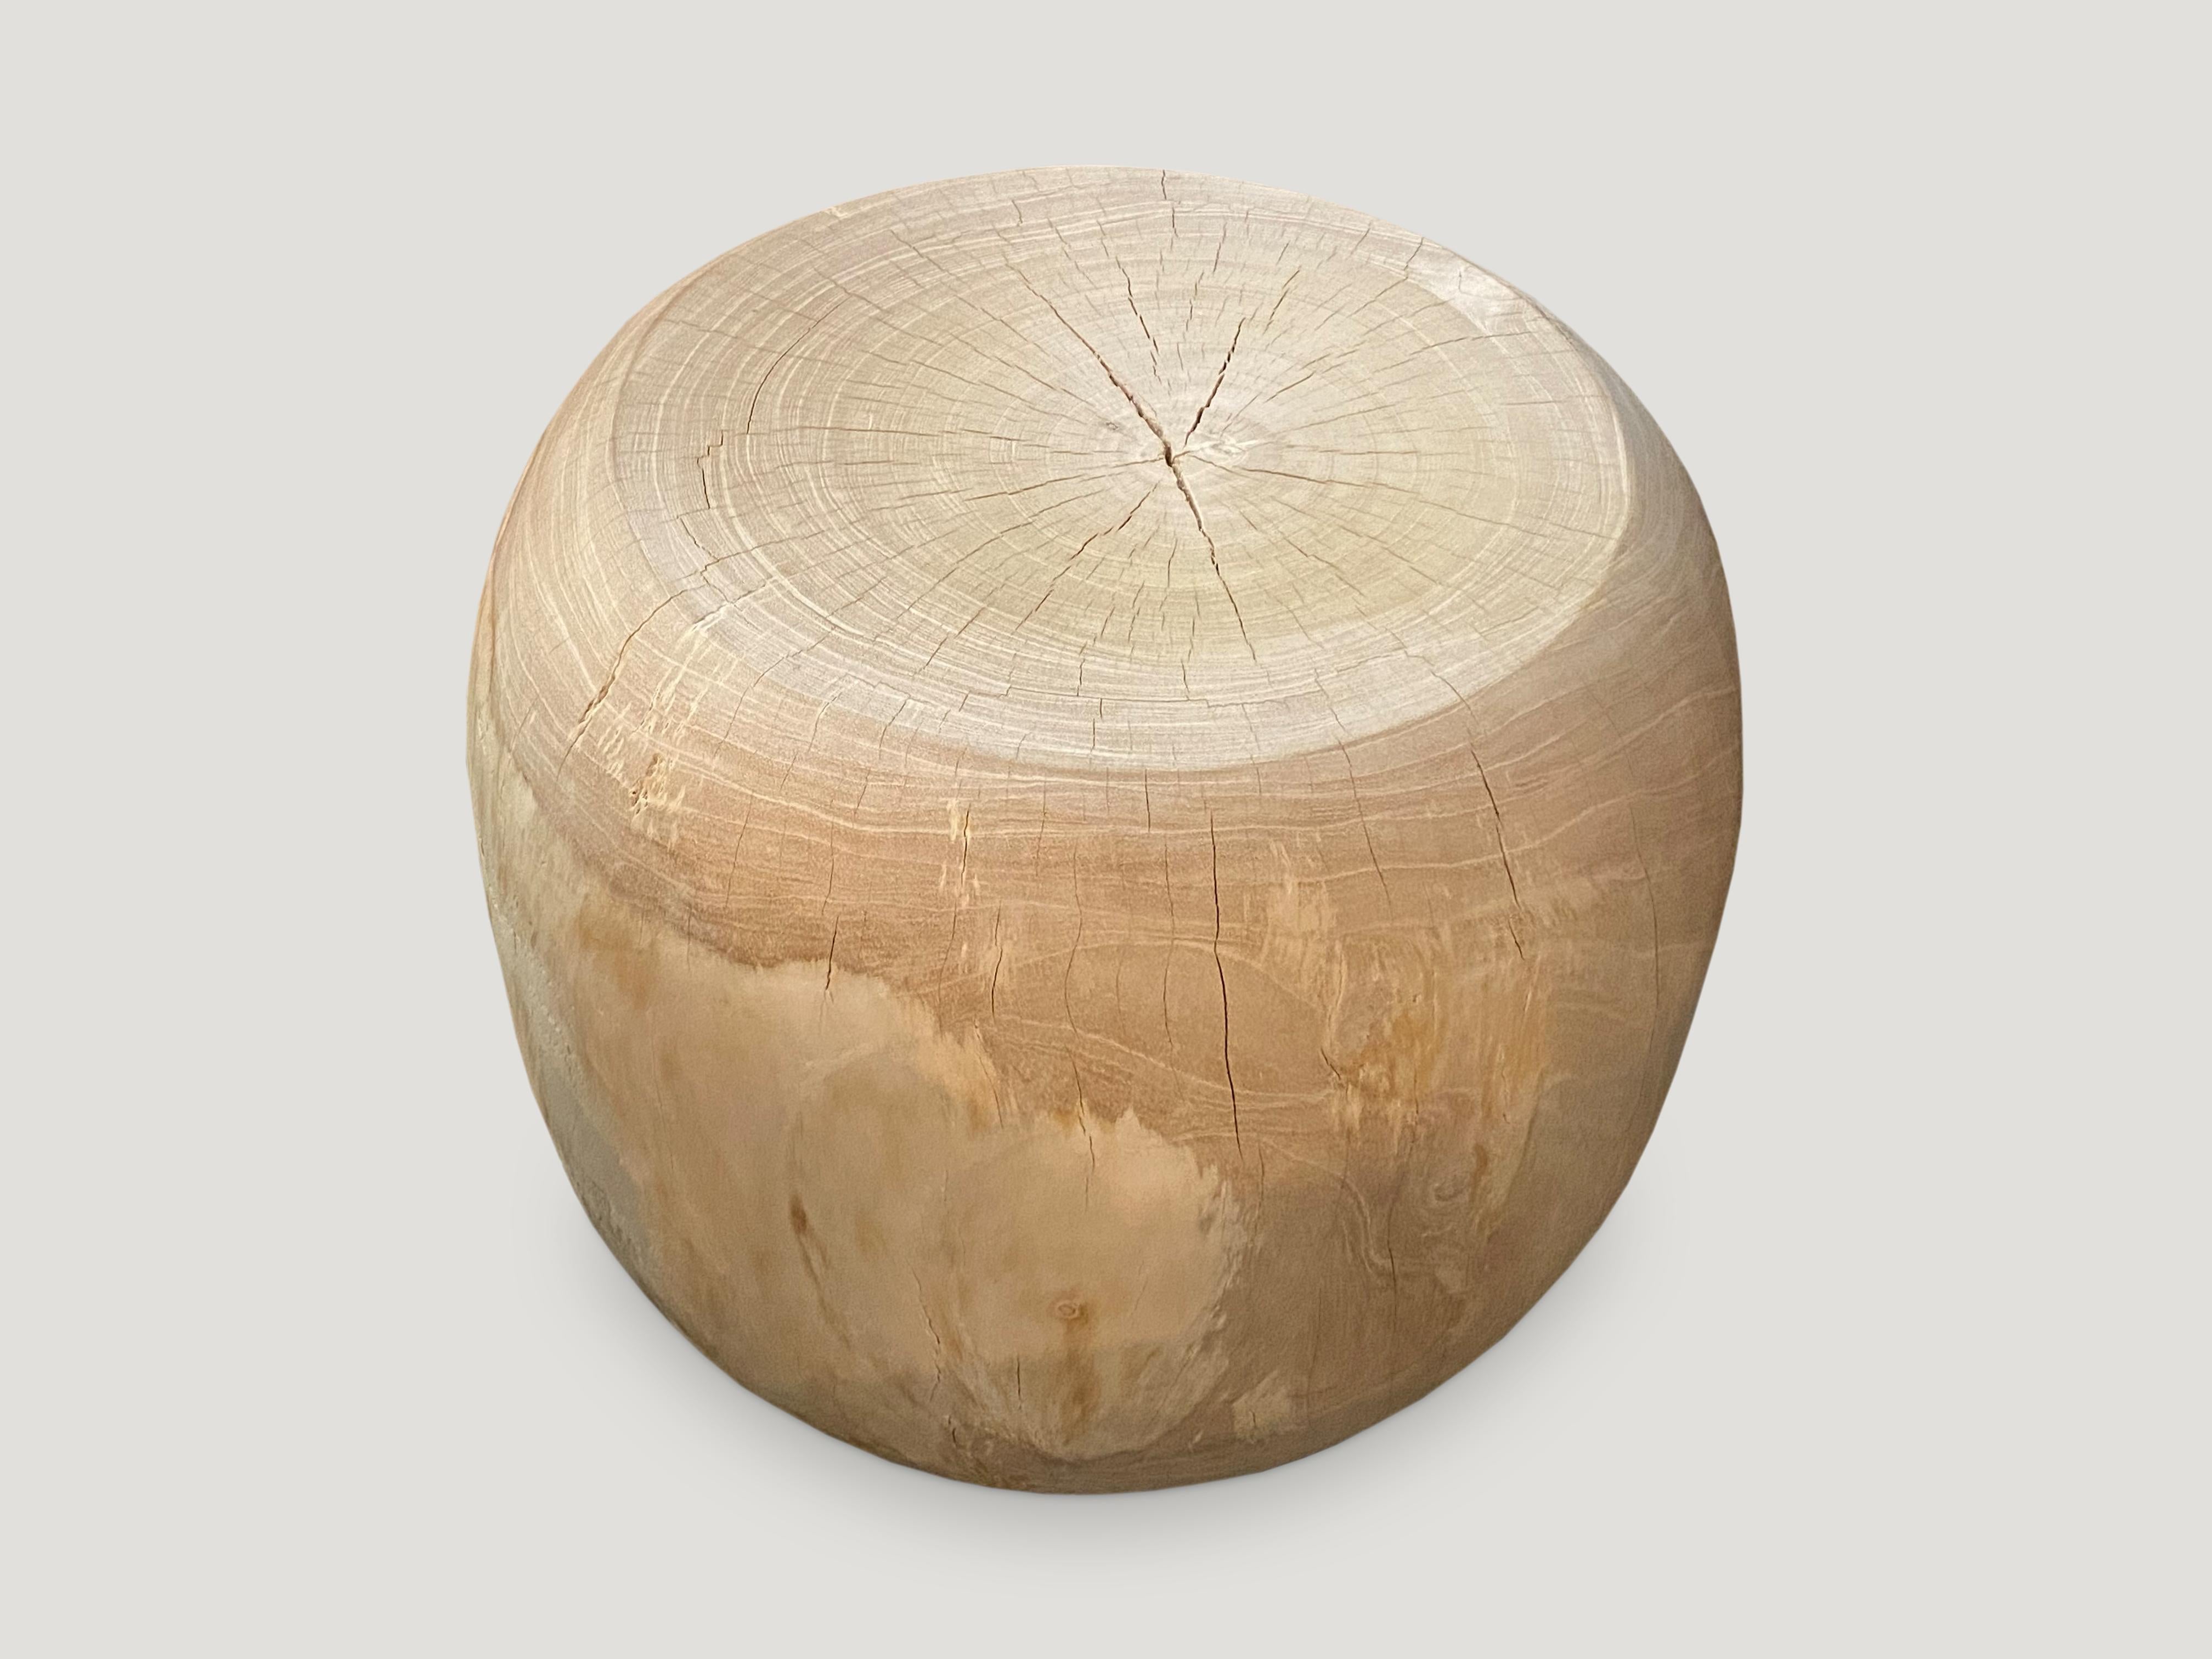 Reclaimed teak wood which we have hand carved into a beautiful drum shaped side table and bleached to a bone finish. Organic is the new modern.

The St. Barts Collection features an exciting new line of organic white wash and natural weathered